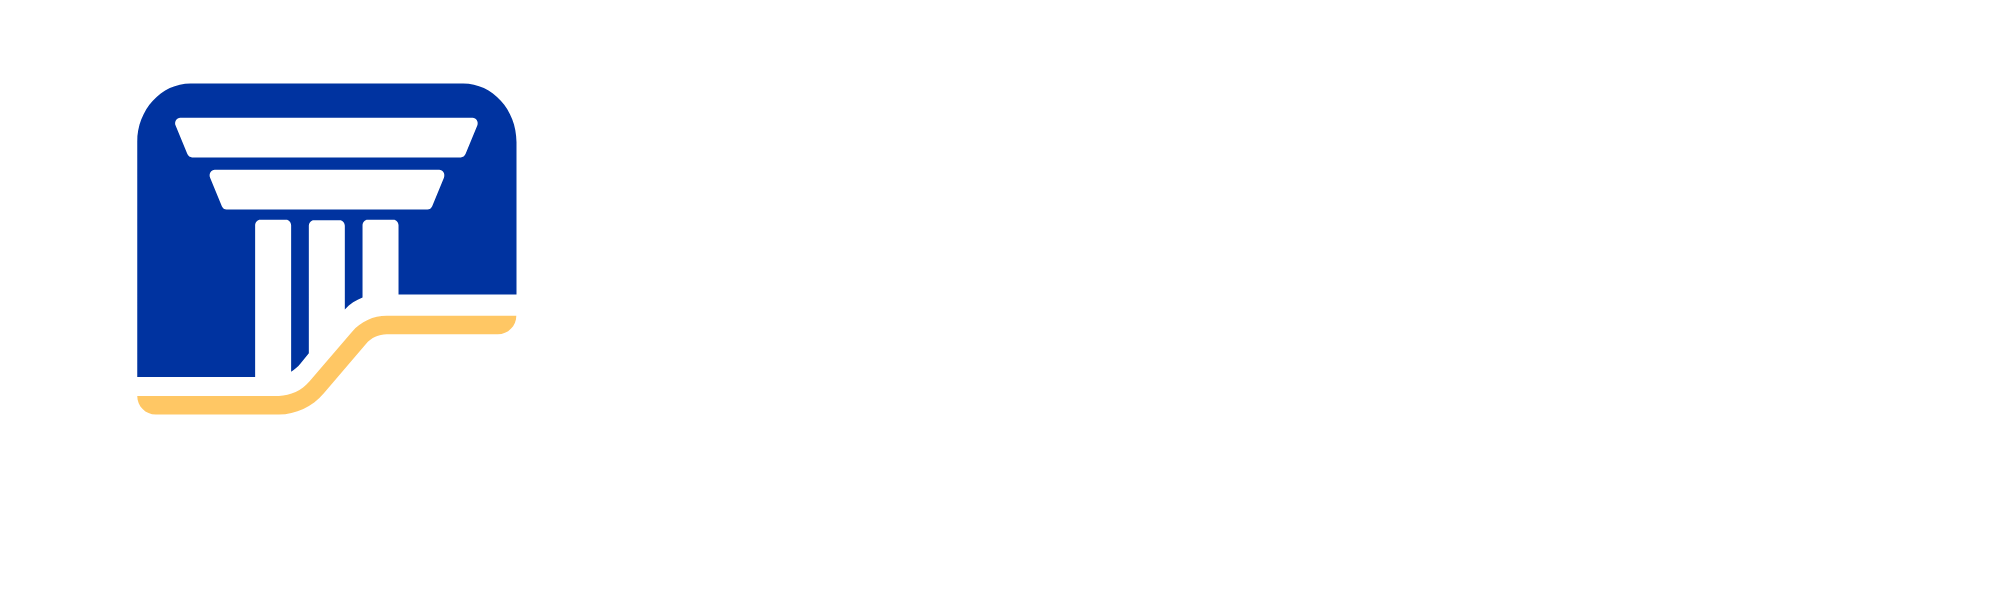 Craft Financial Group